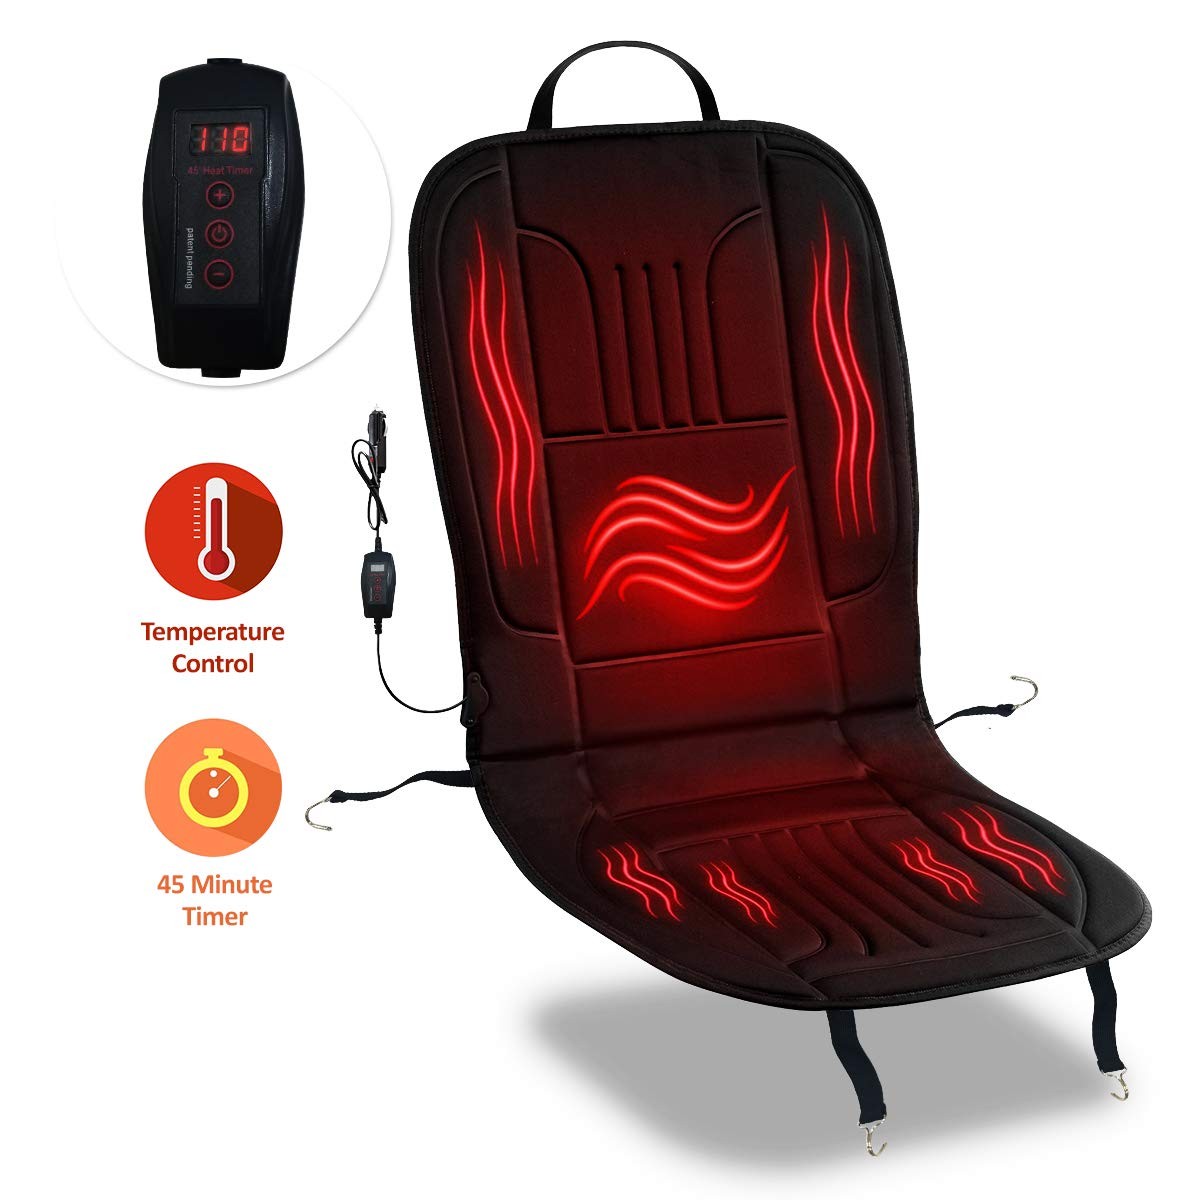 Fireproof New and Improved 2019 Version 12V Heating Warmer Pad Cover Perfect for Cold Weather and Winter Driving Zone Tech Car Heated Seat Cover Cushion Hot Warmer 